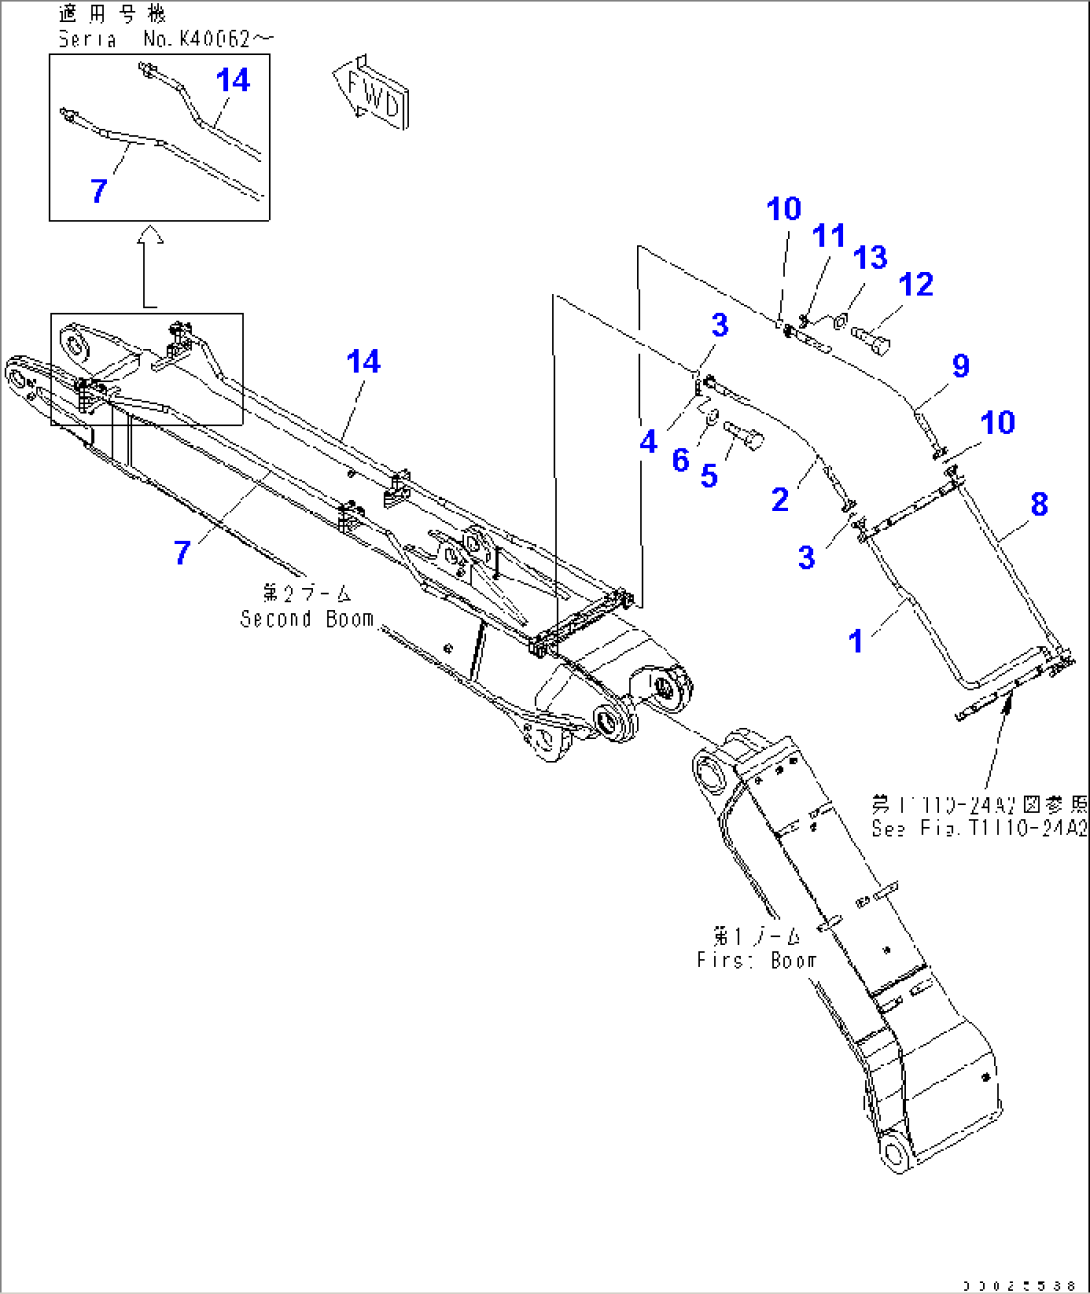 2-PIECE BOOM (ADDITIONAL PIPING) (2 ATTACHIMENT LINE) (PIPING)